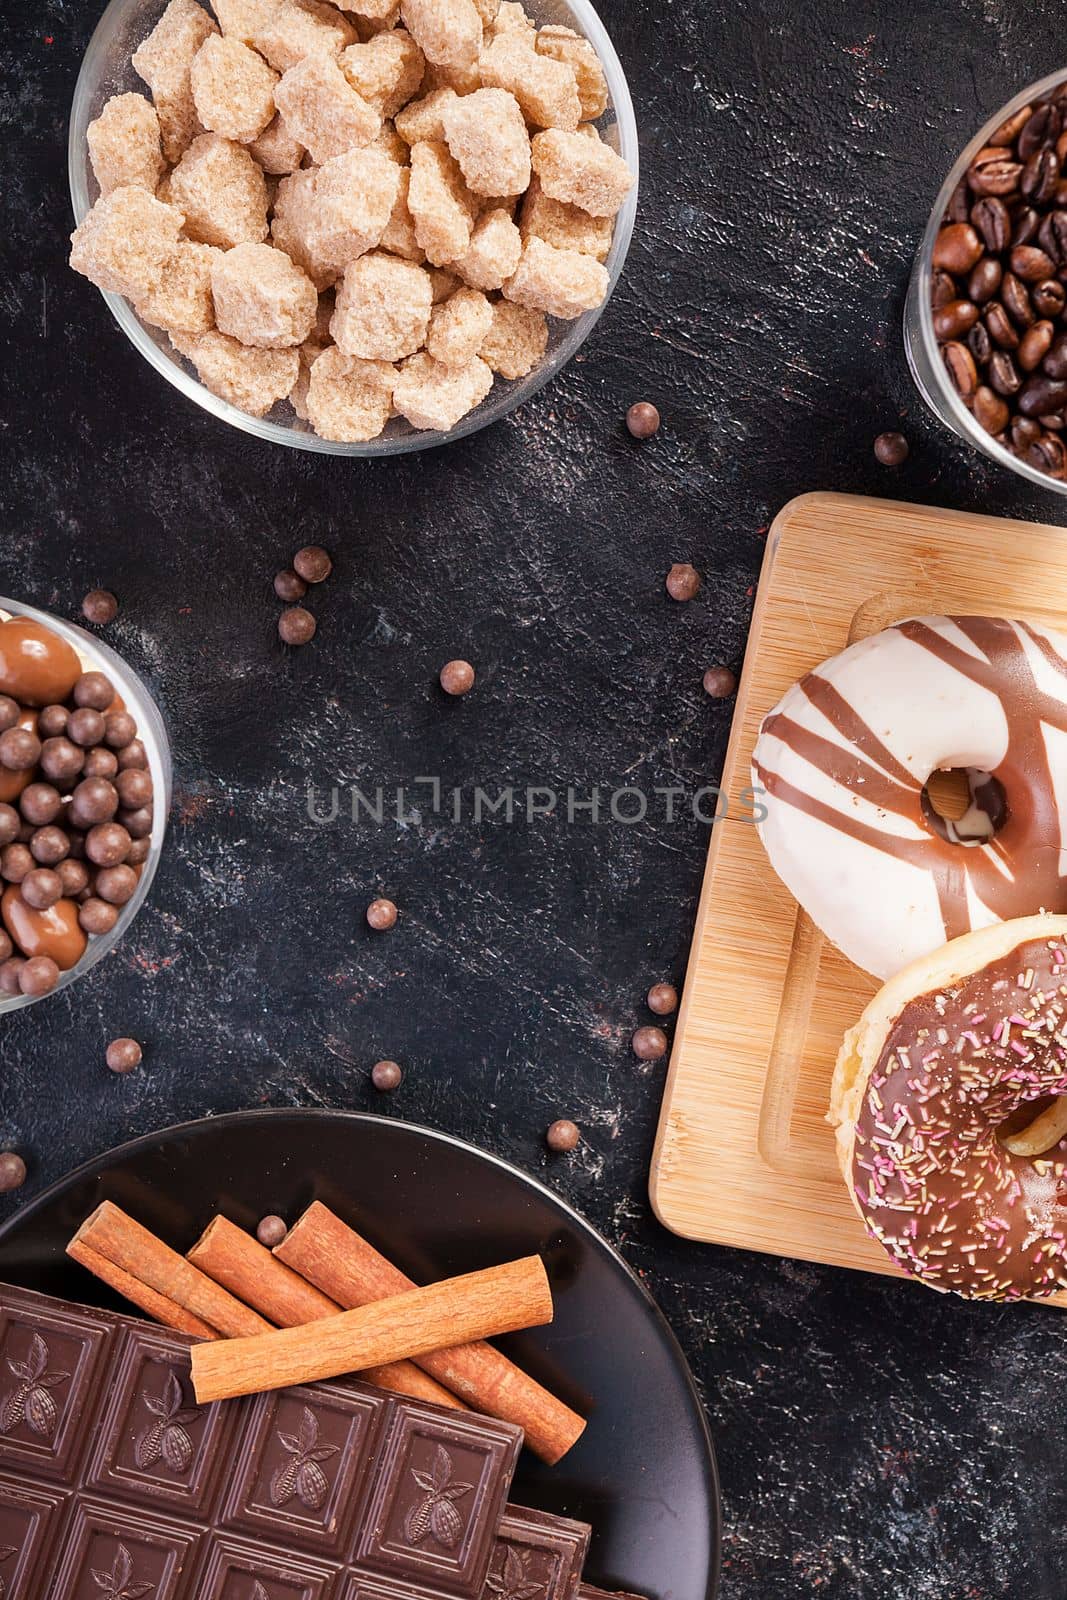 Candies, brown sugar, donuts and coffee by DCStudio